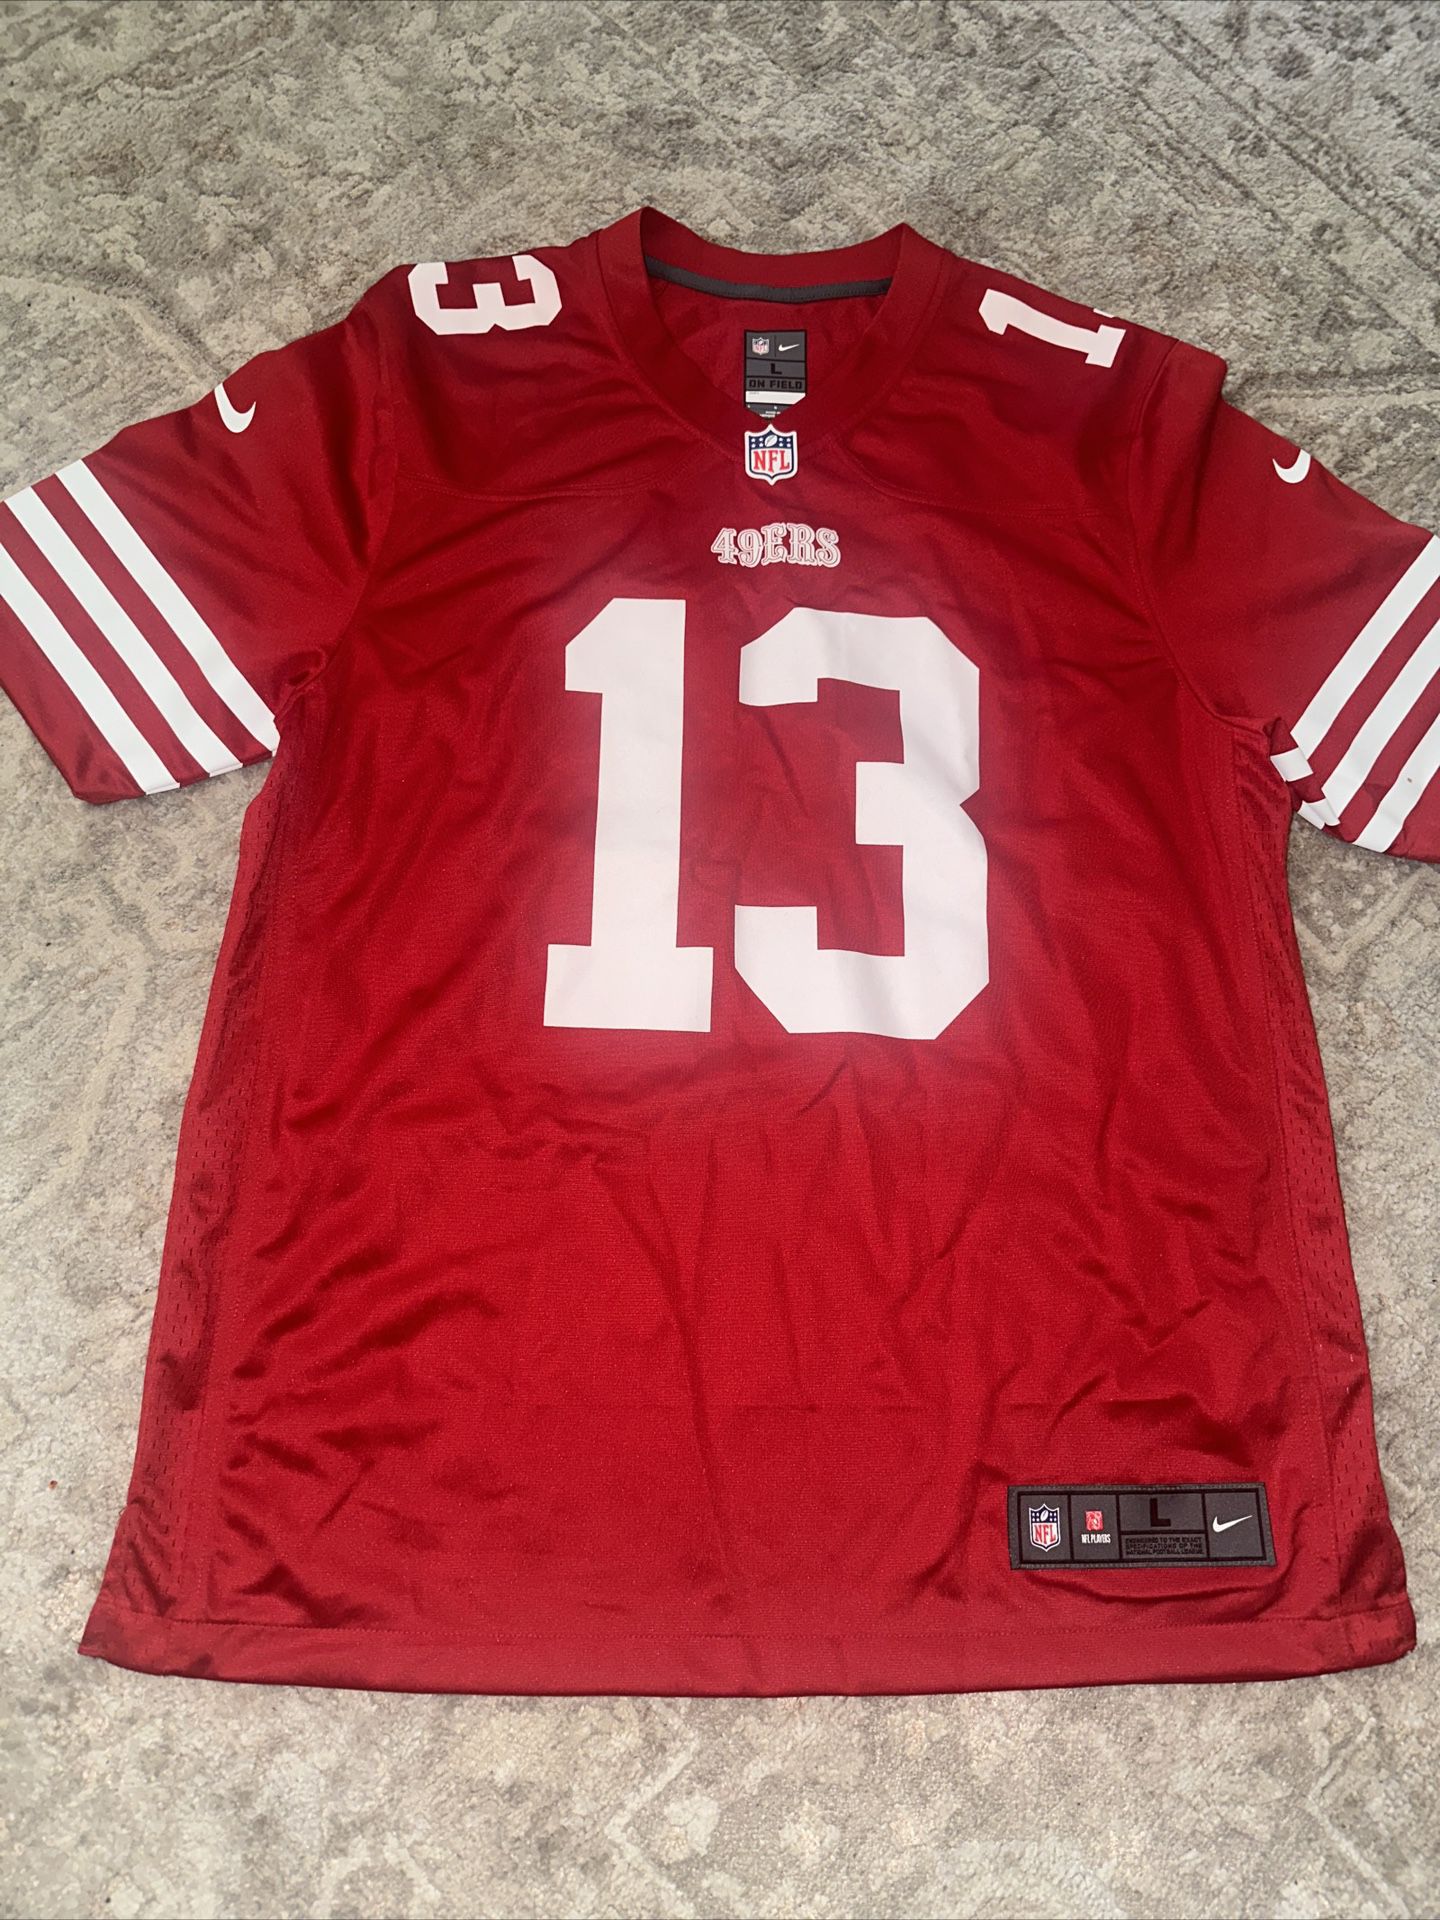 New 49ers Jersey